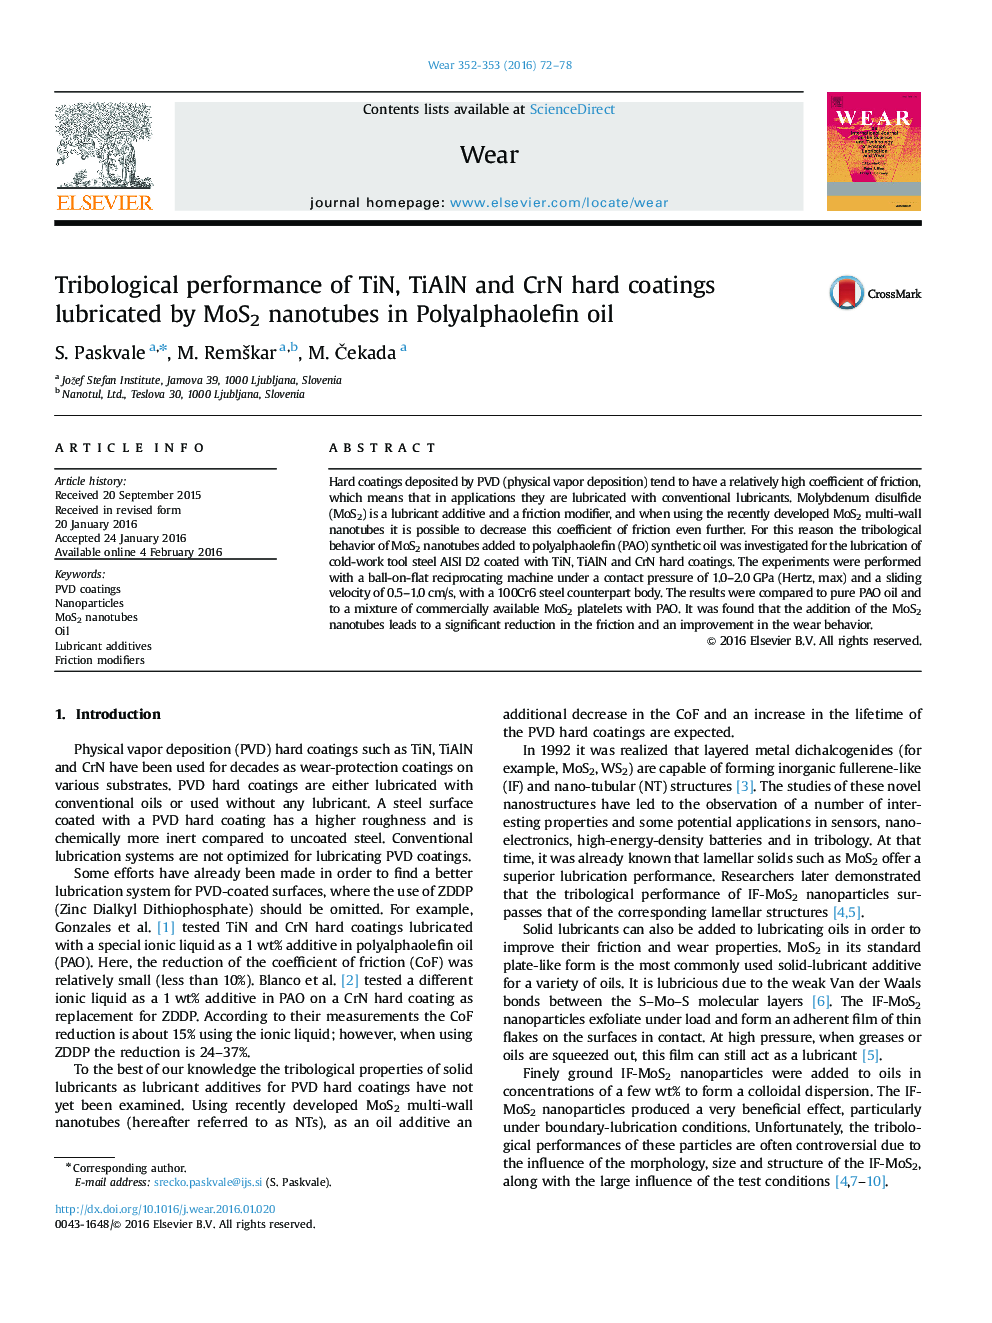 Tribological performance of TiN, TiAlN and CrN hard coatings lubricated by MoS2 nanotubes in Polyalphaolefin oil